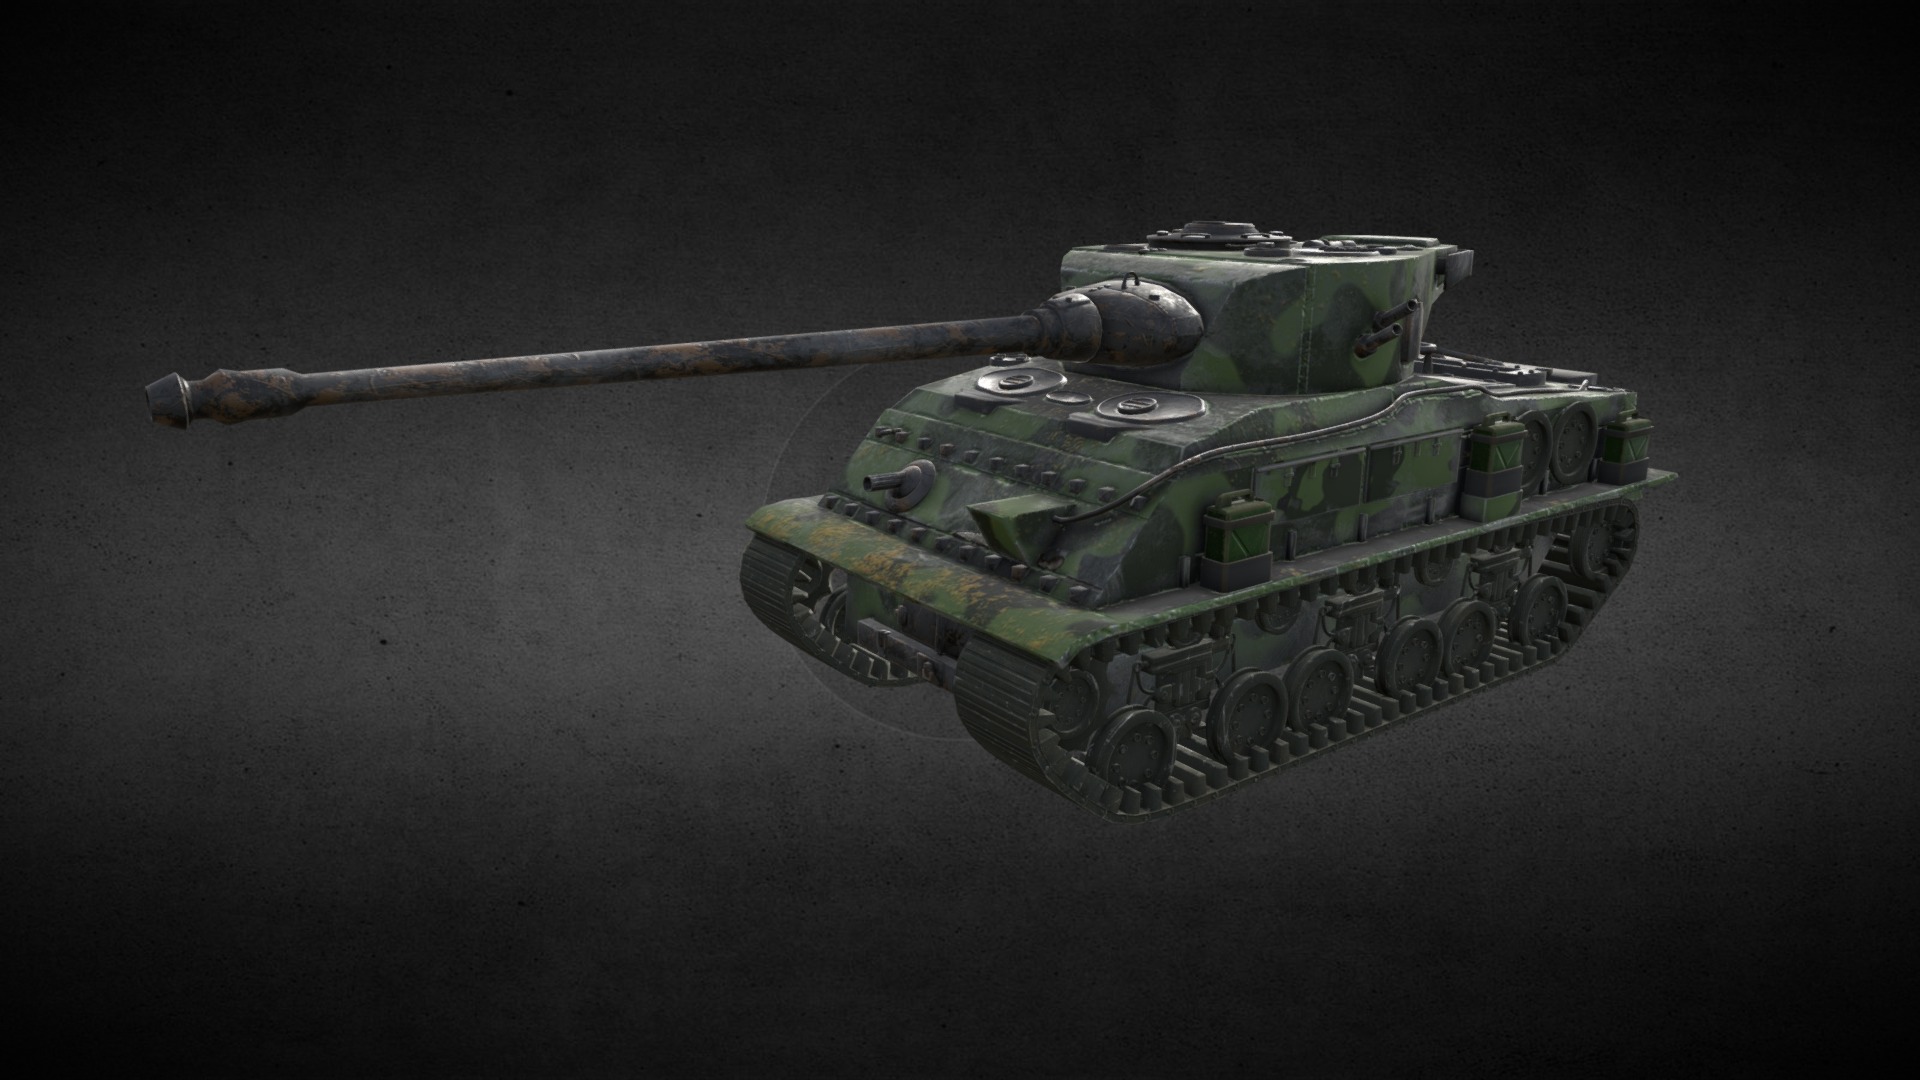 3D model Military Tank! - This is a 3D model of the Military Tank!. The 3D model is about a green military tank.